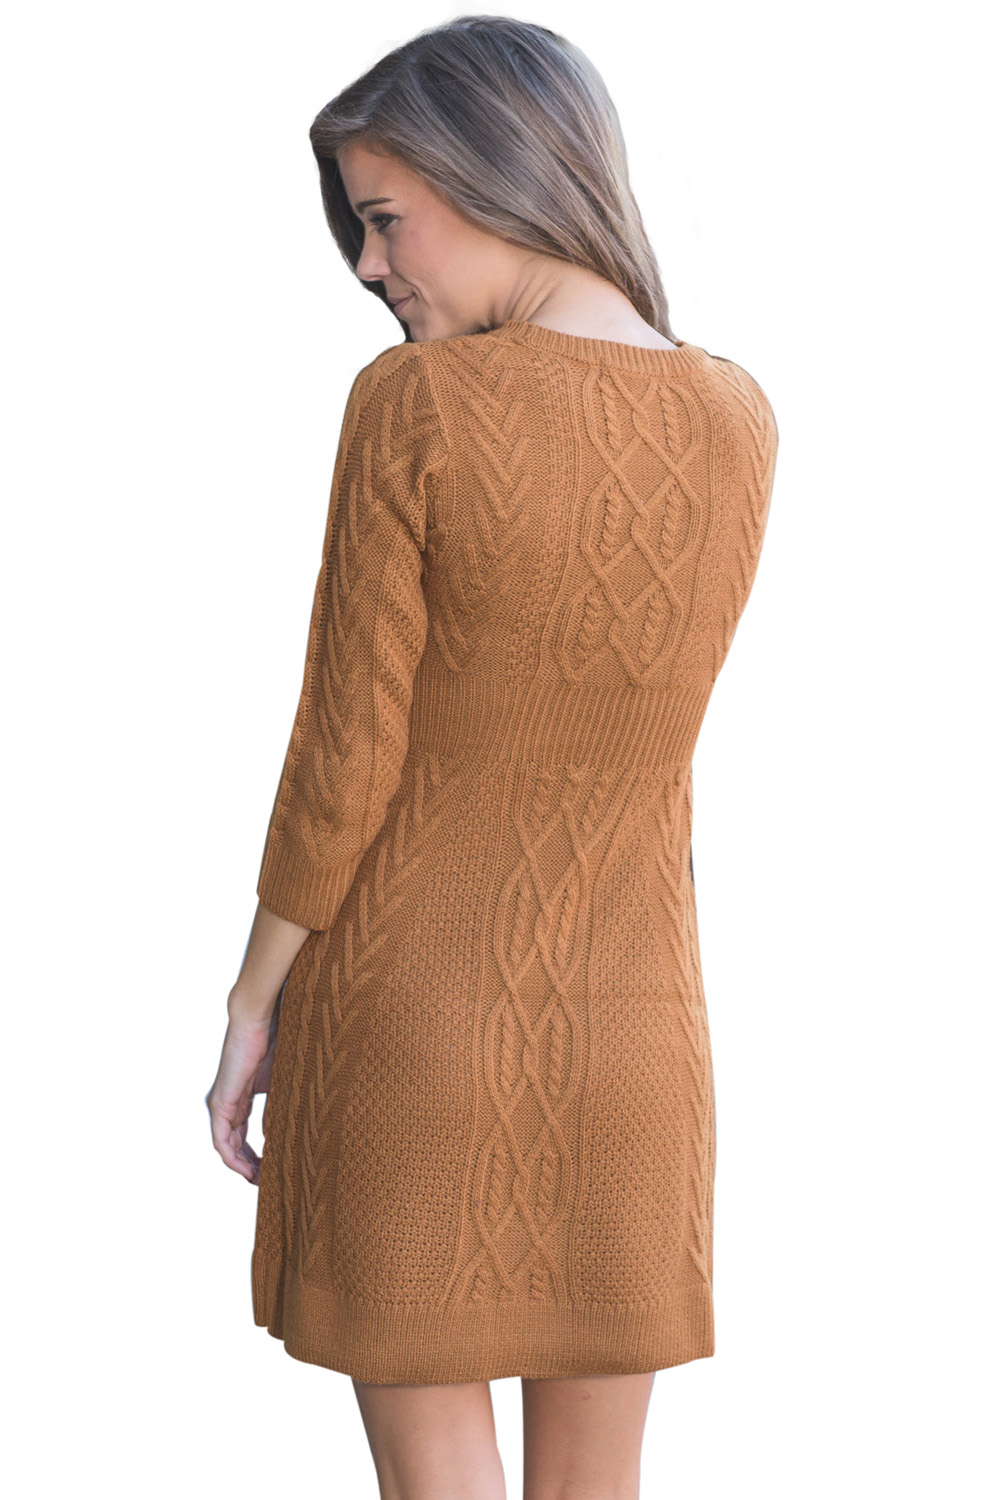 BY27692-17 Brown Cable Knit Fitted Sweater Dress